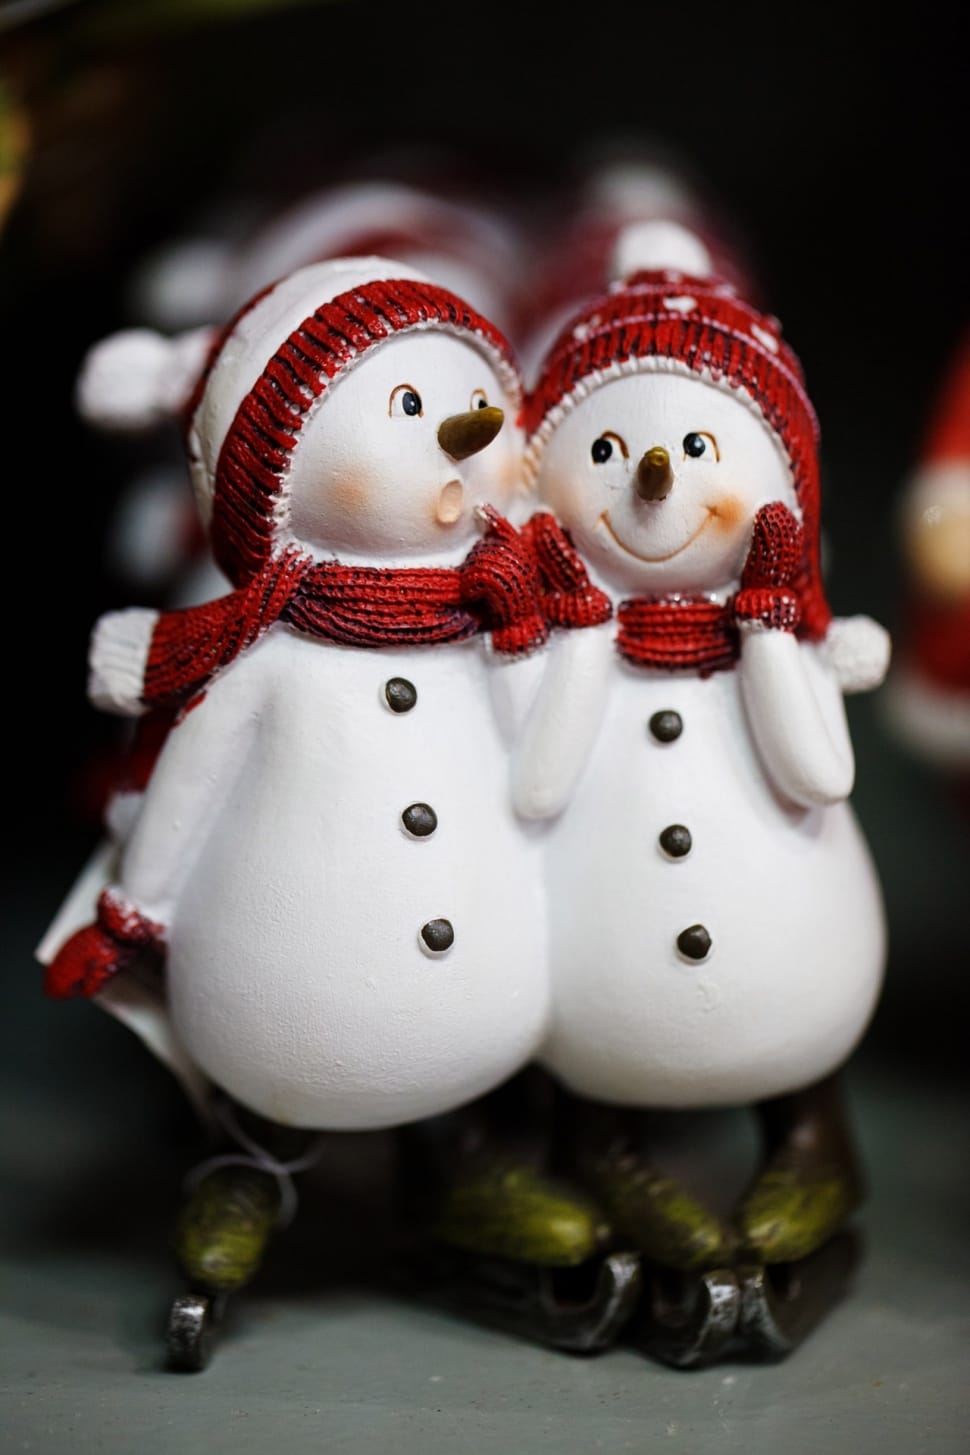 two snowman ceramic figurine on gray surface preview